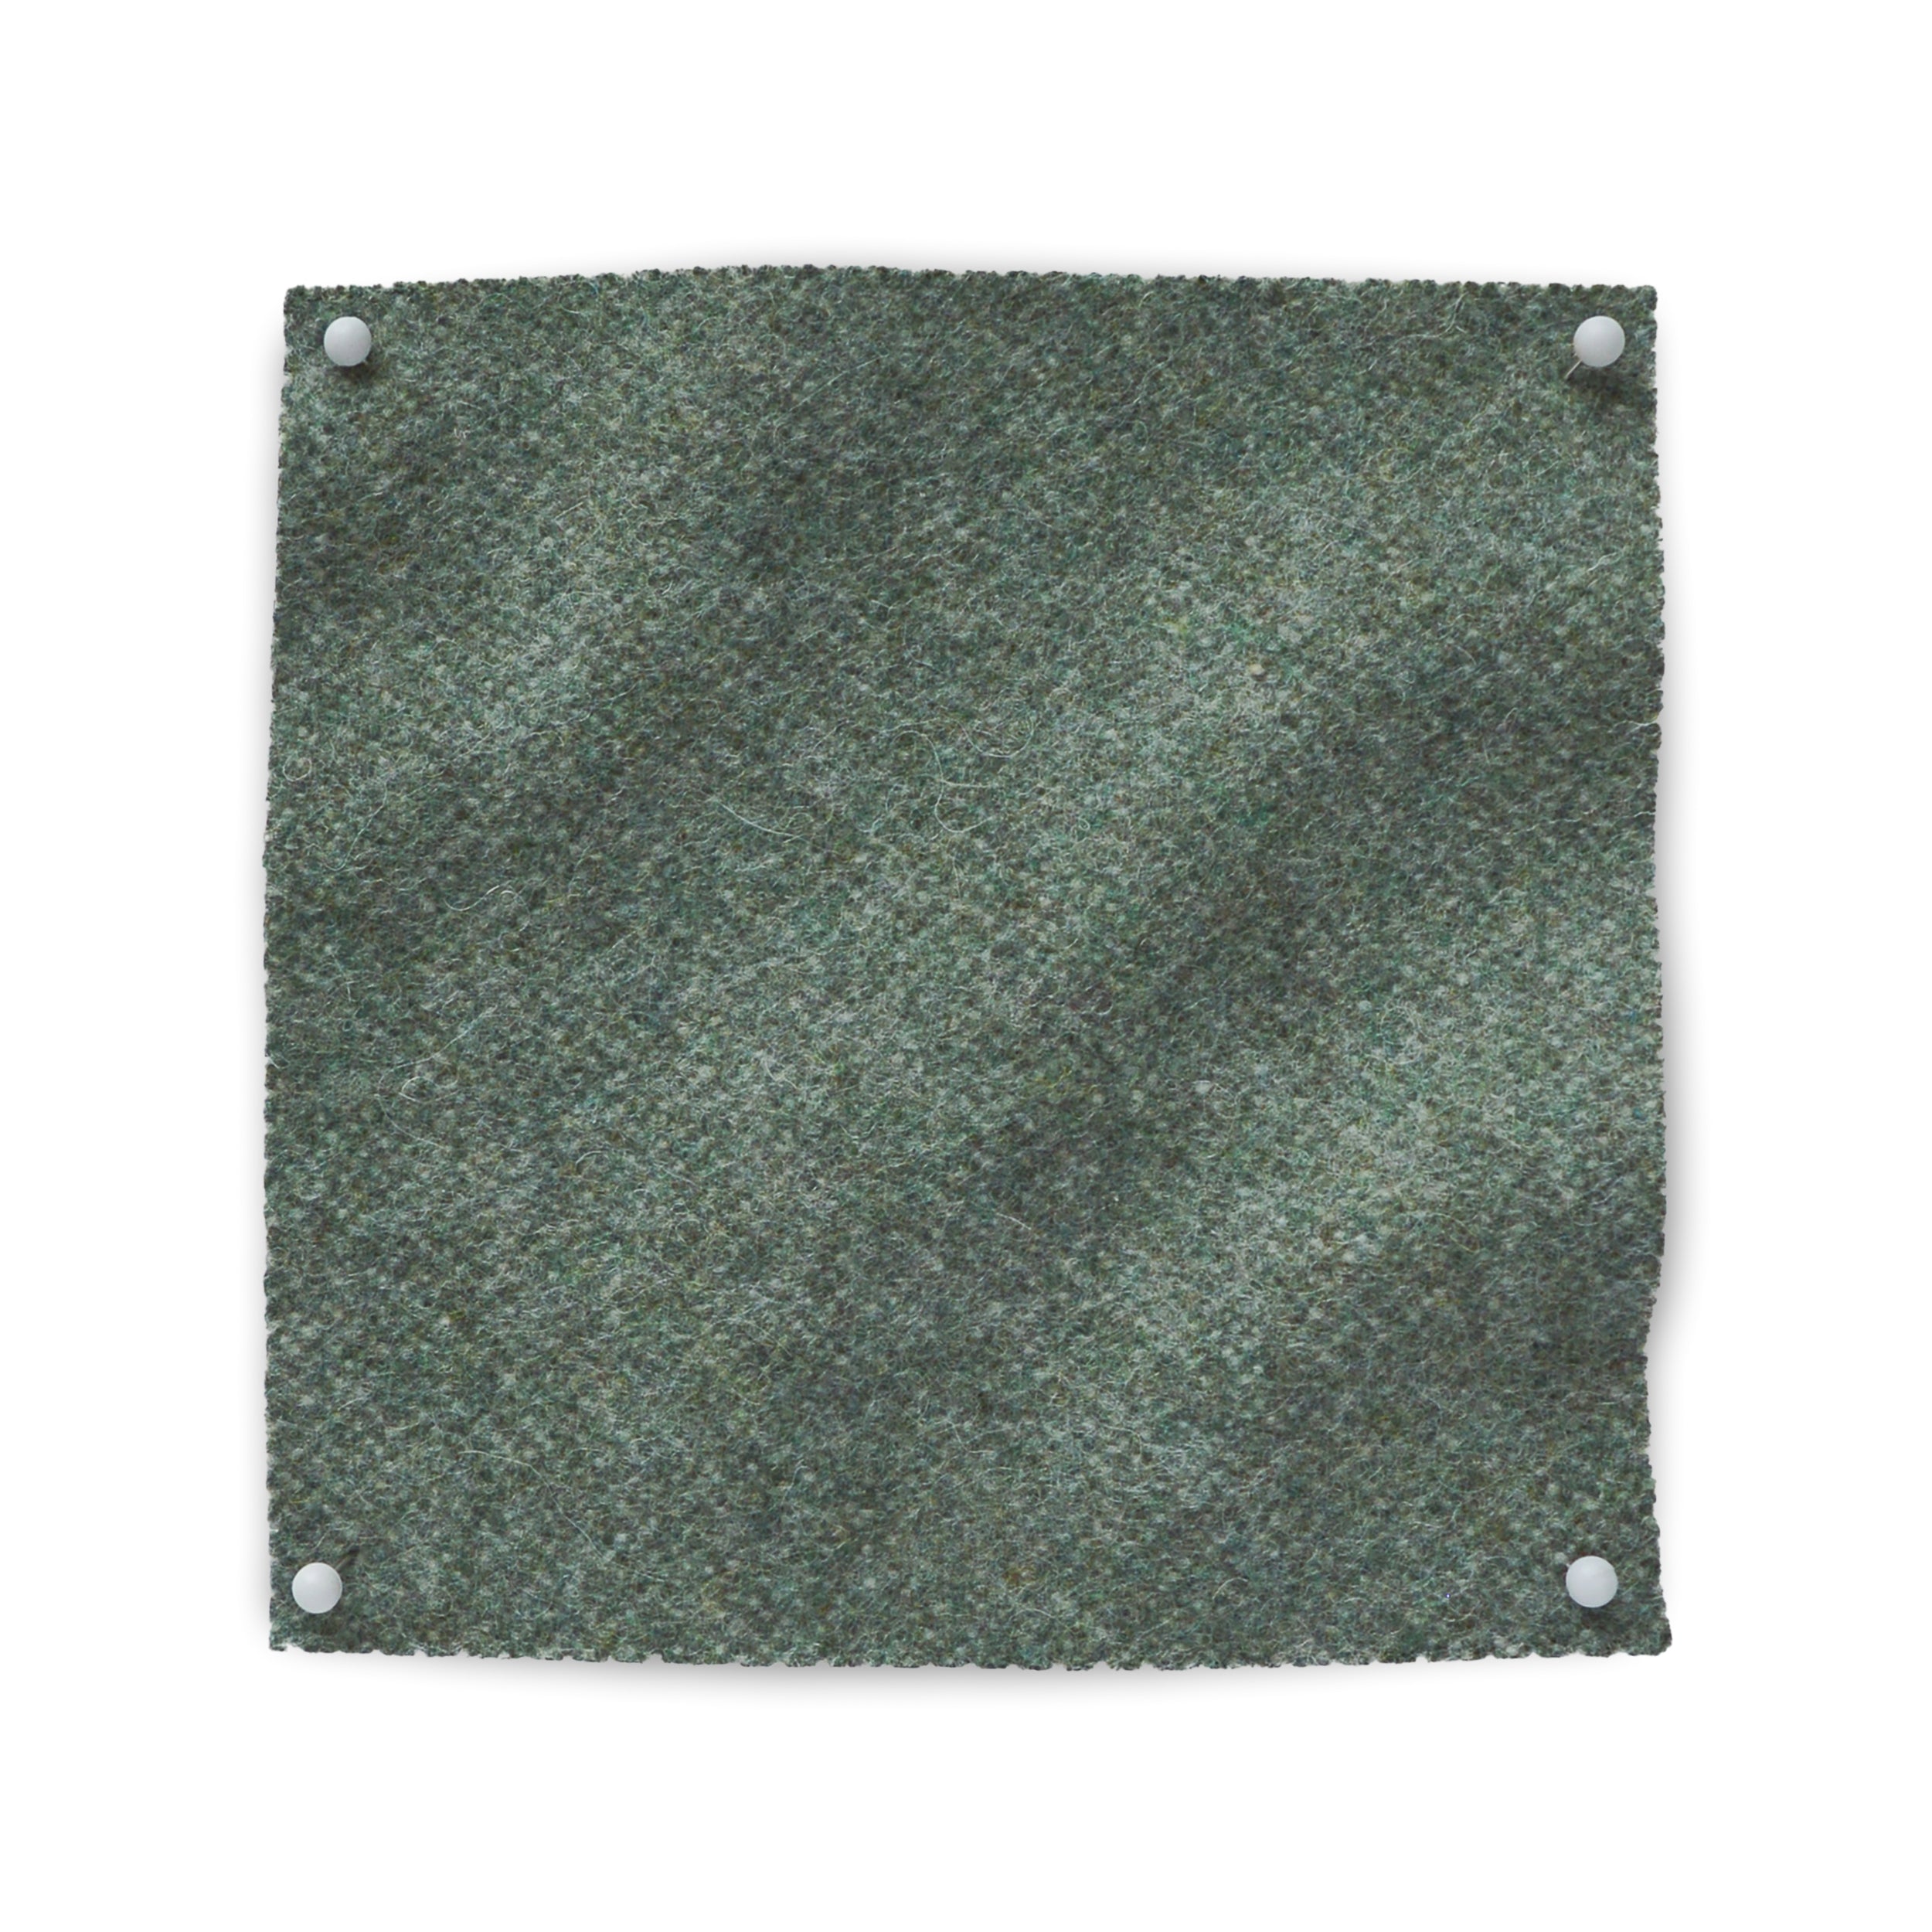 Square fabric swatch of wool in a dark green colorway.